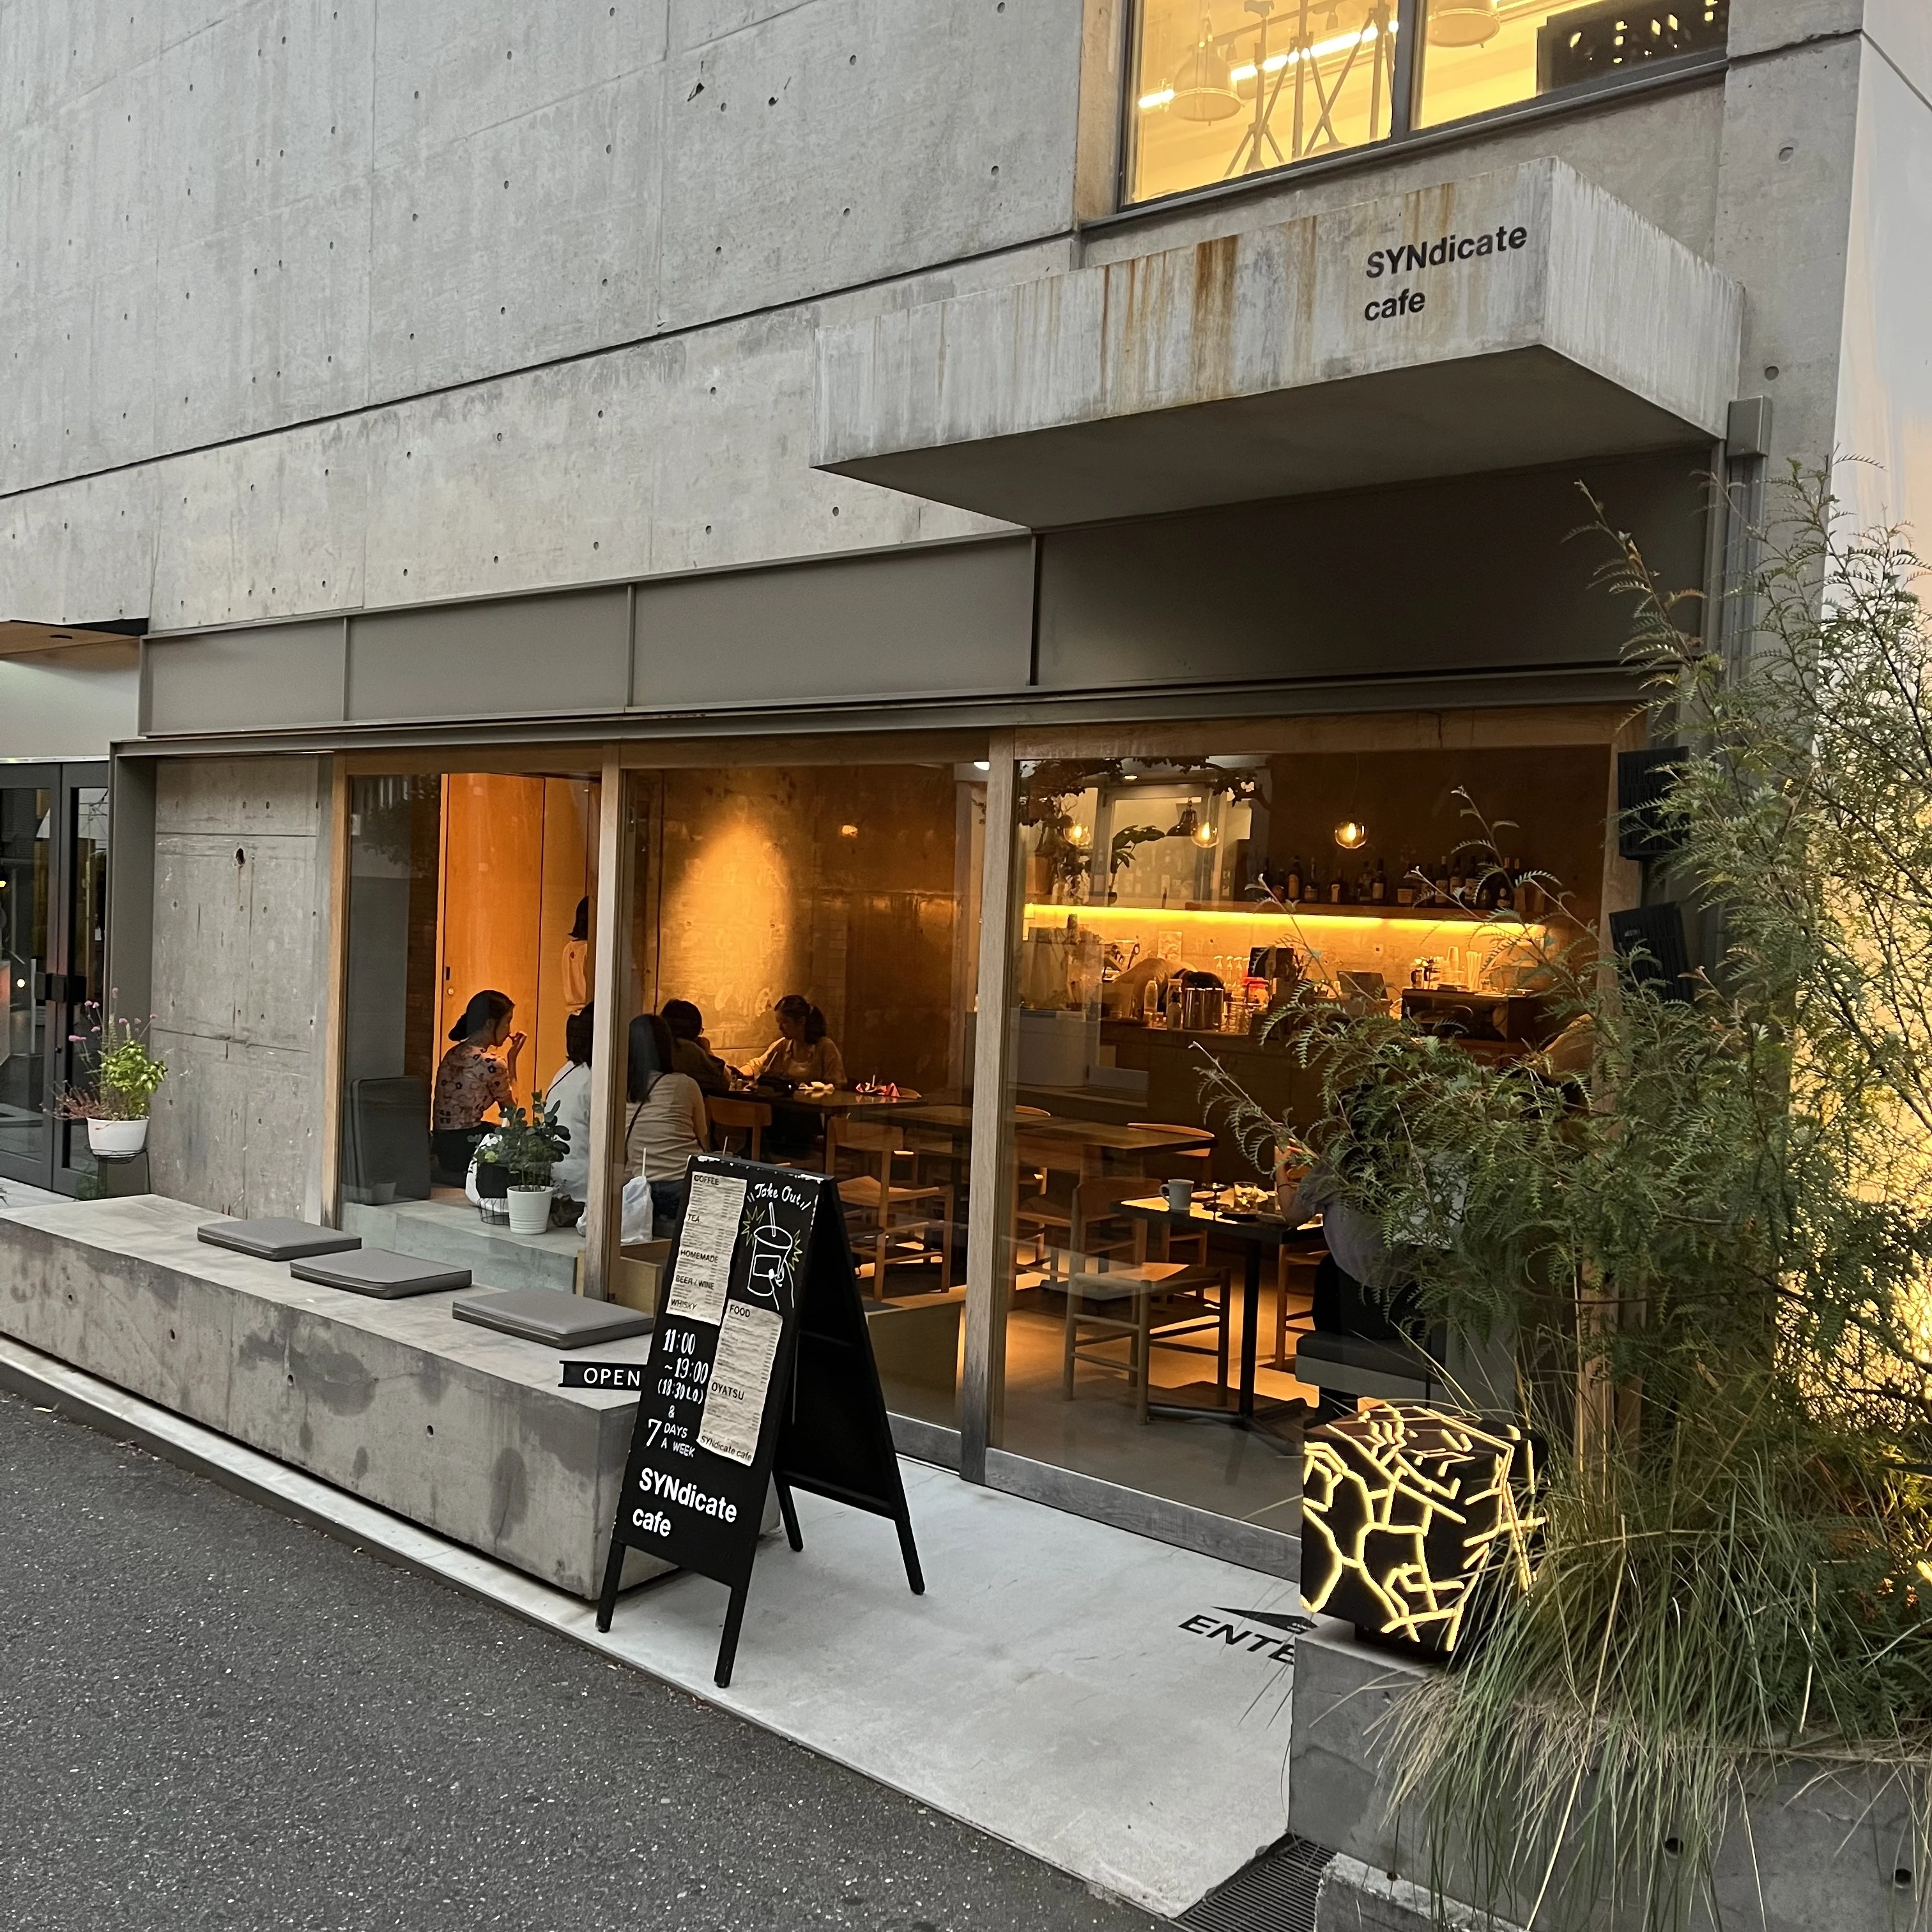 「SYNdicate cafe」の店頭